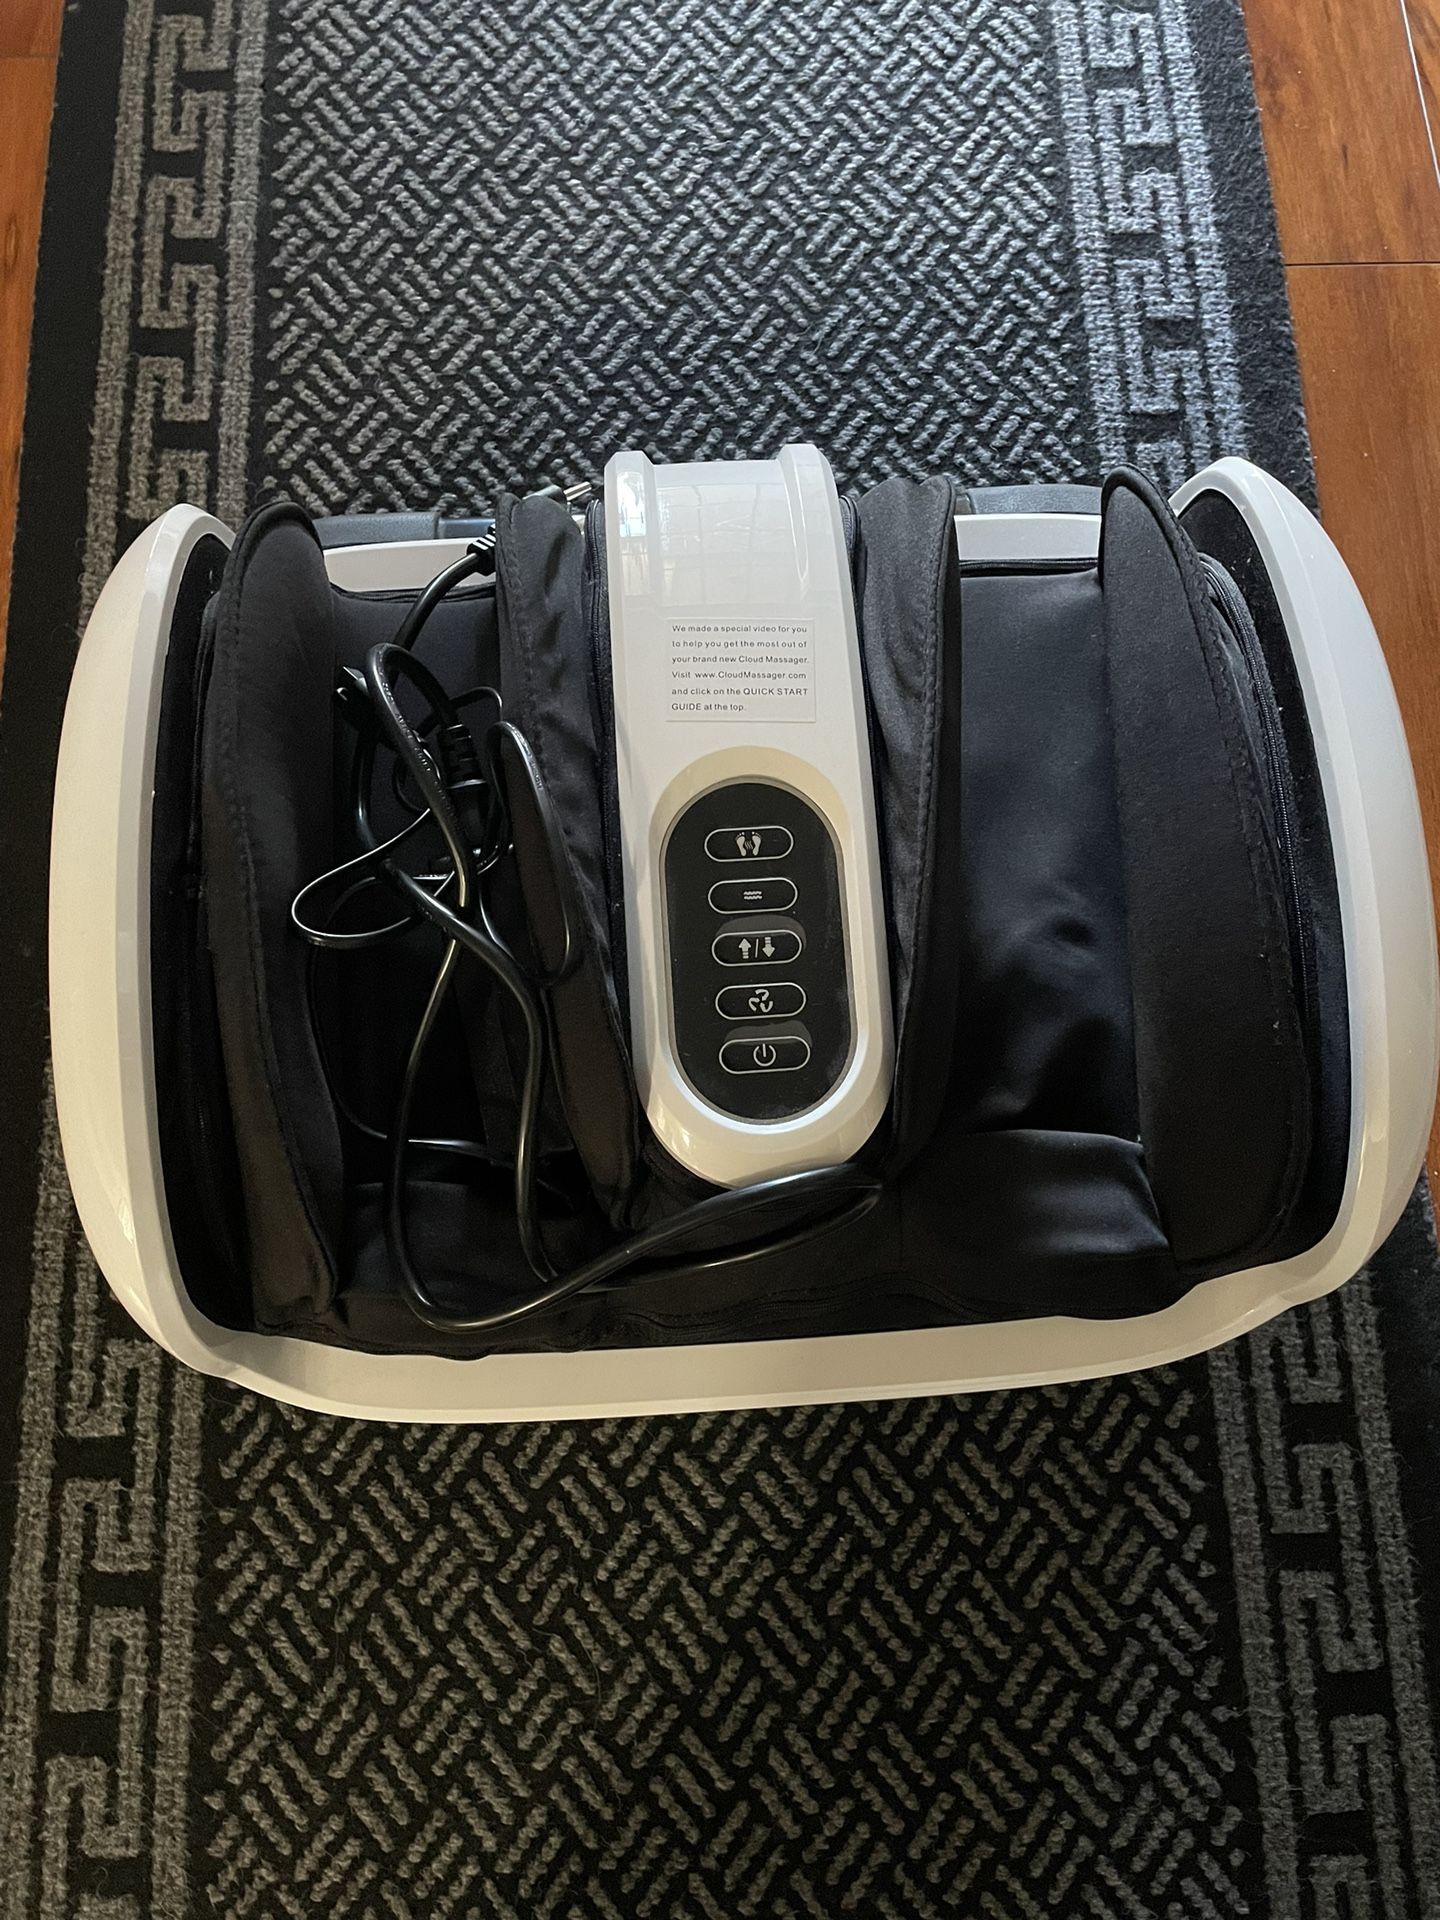 Magic Makers Shiatsu Massage Pillow With Heat For Neck, Shoulder, & Back  for Sale in Downey, CA - OfferUp